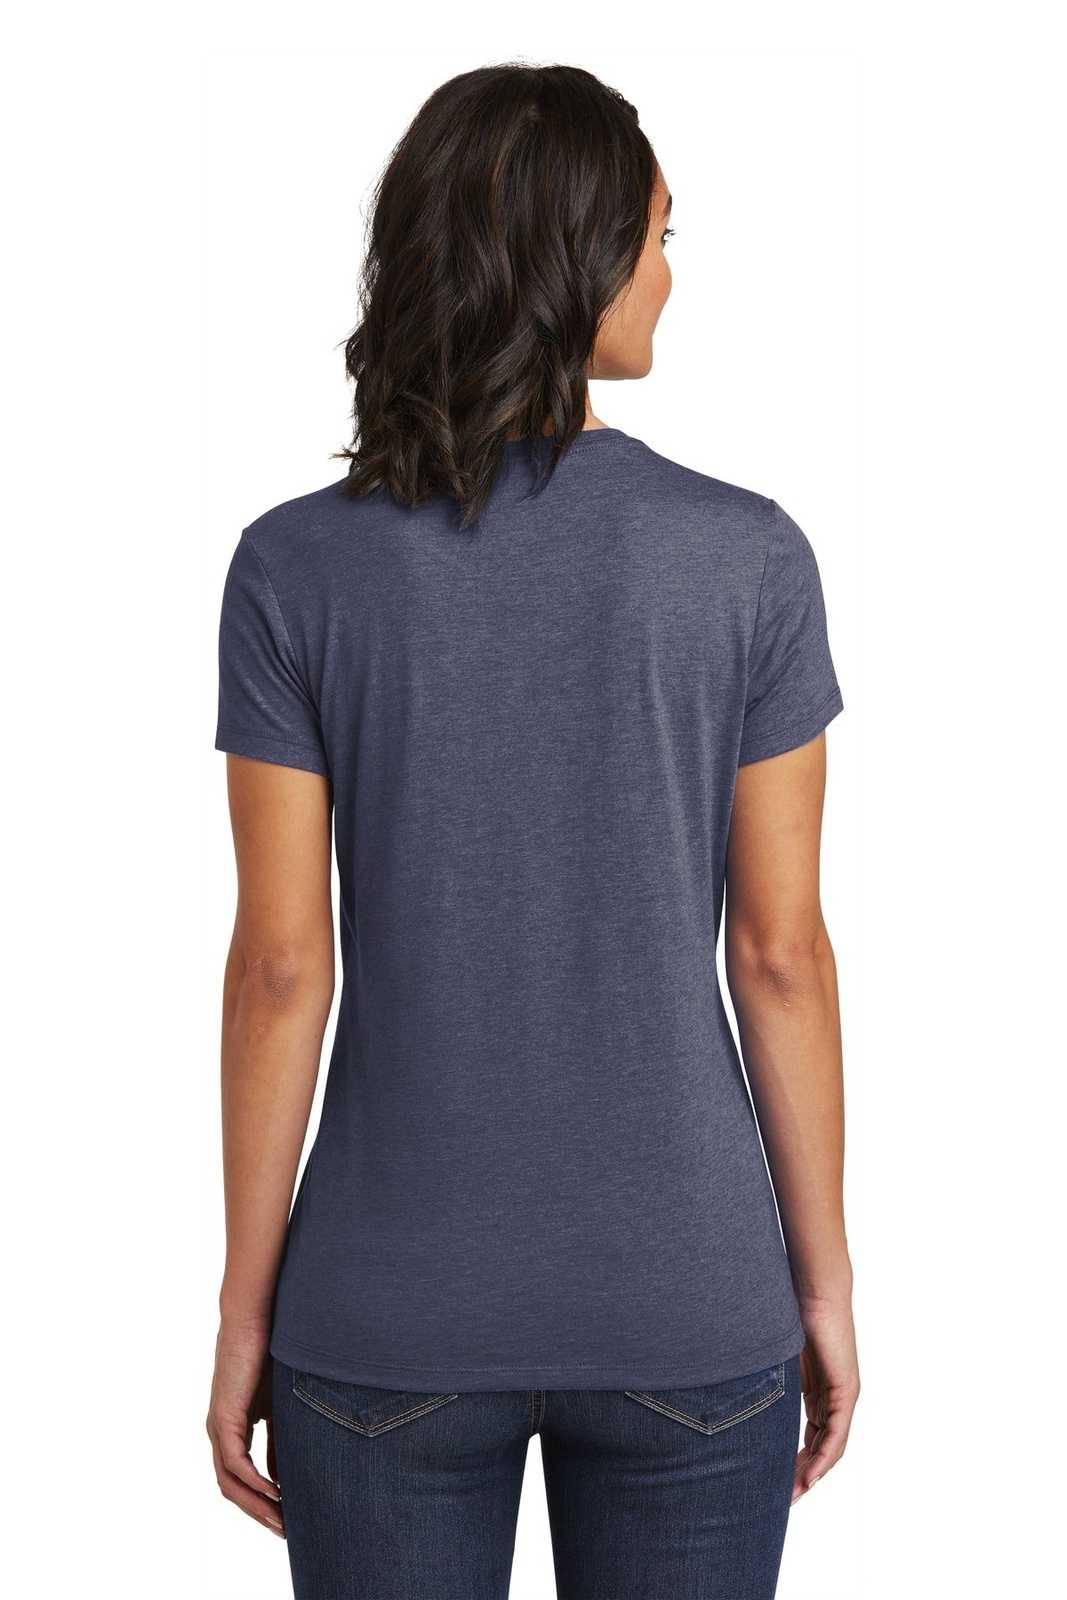 District DT6002 Women's Very Important Tee - Heathered Navy - HIT a Double - 1